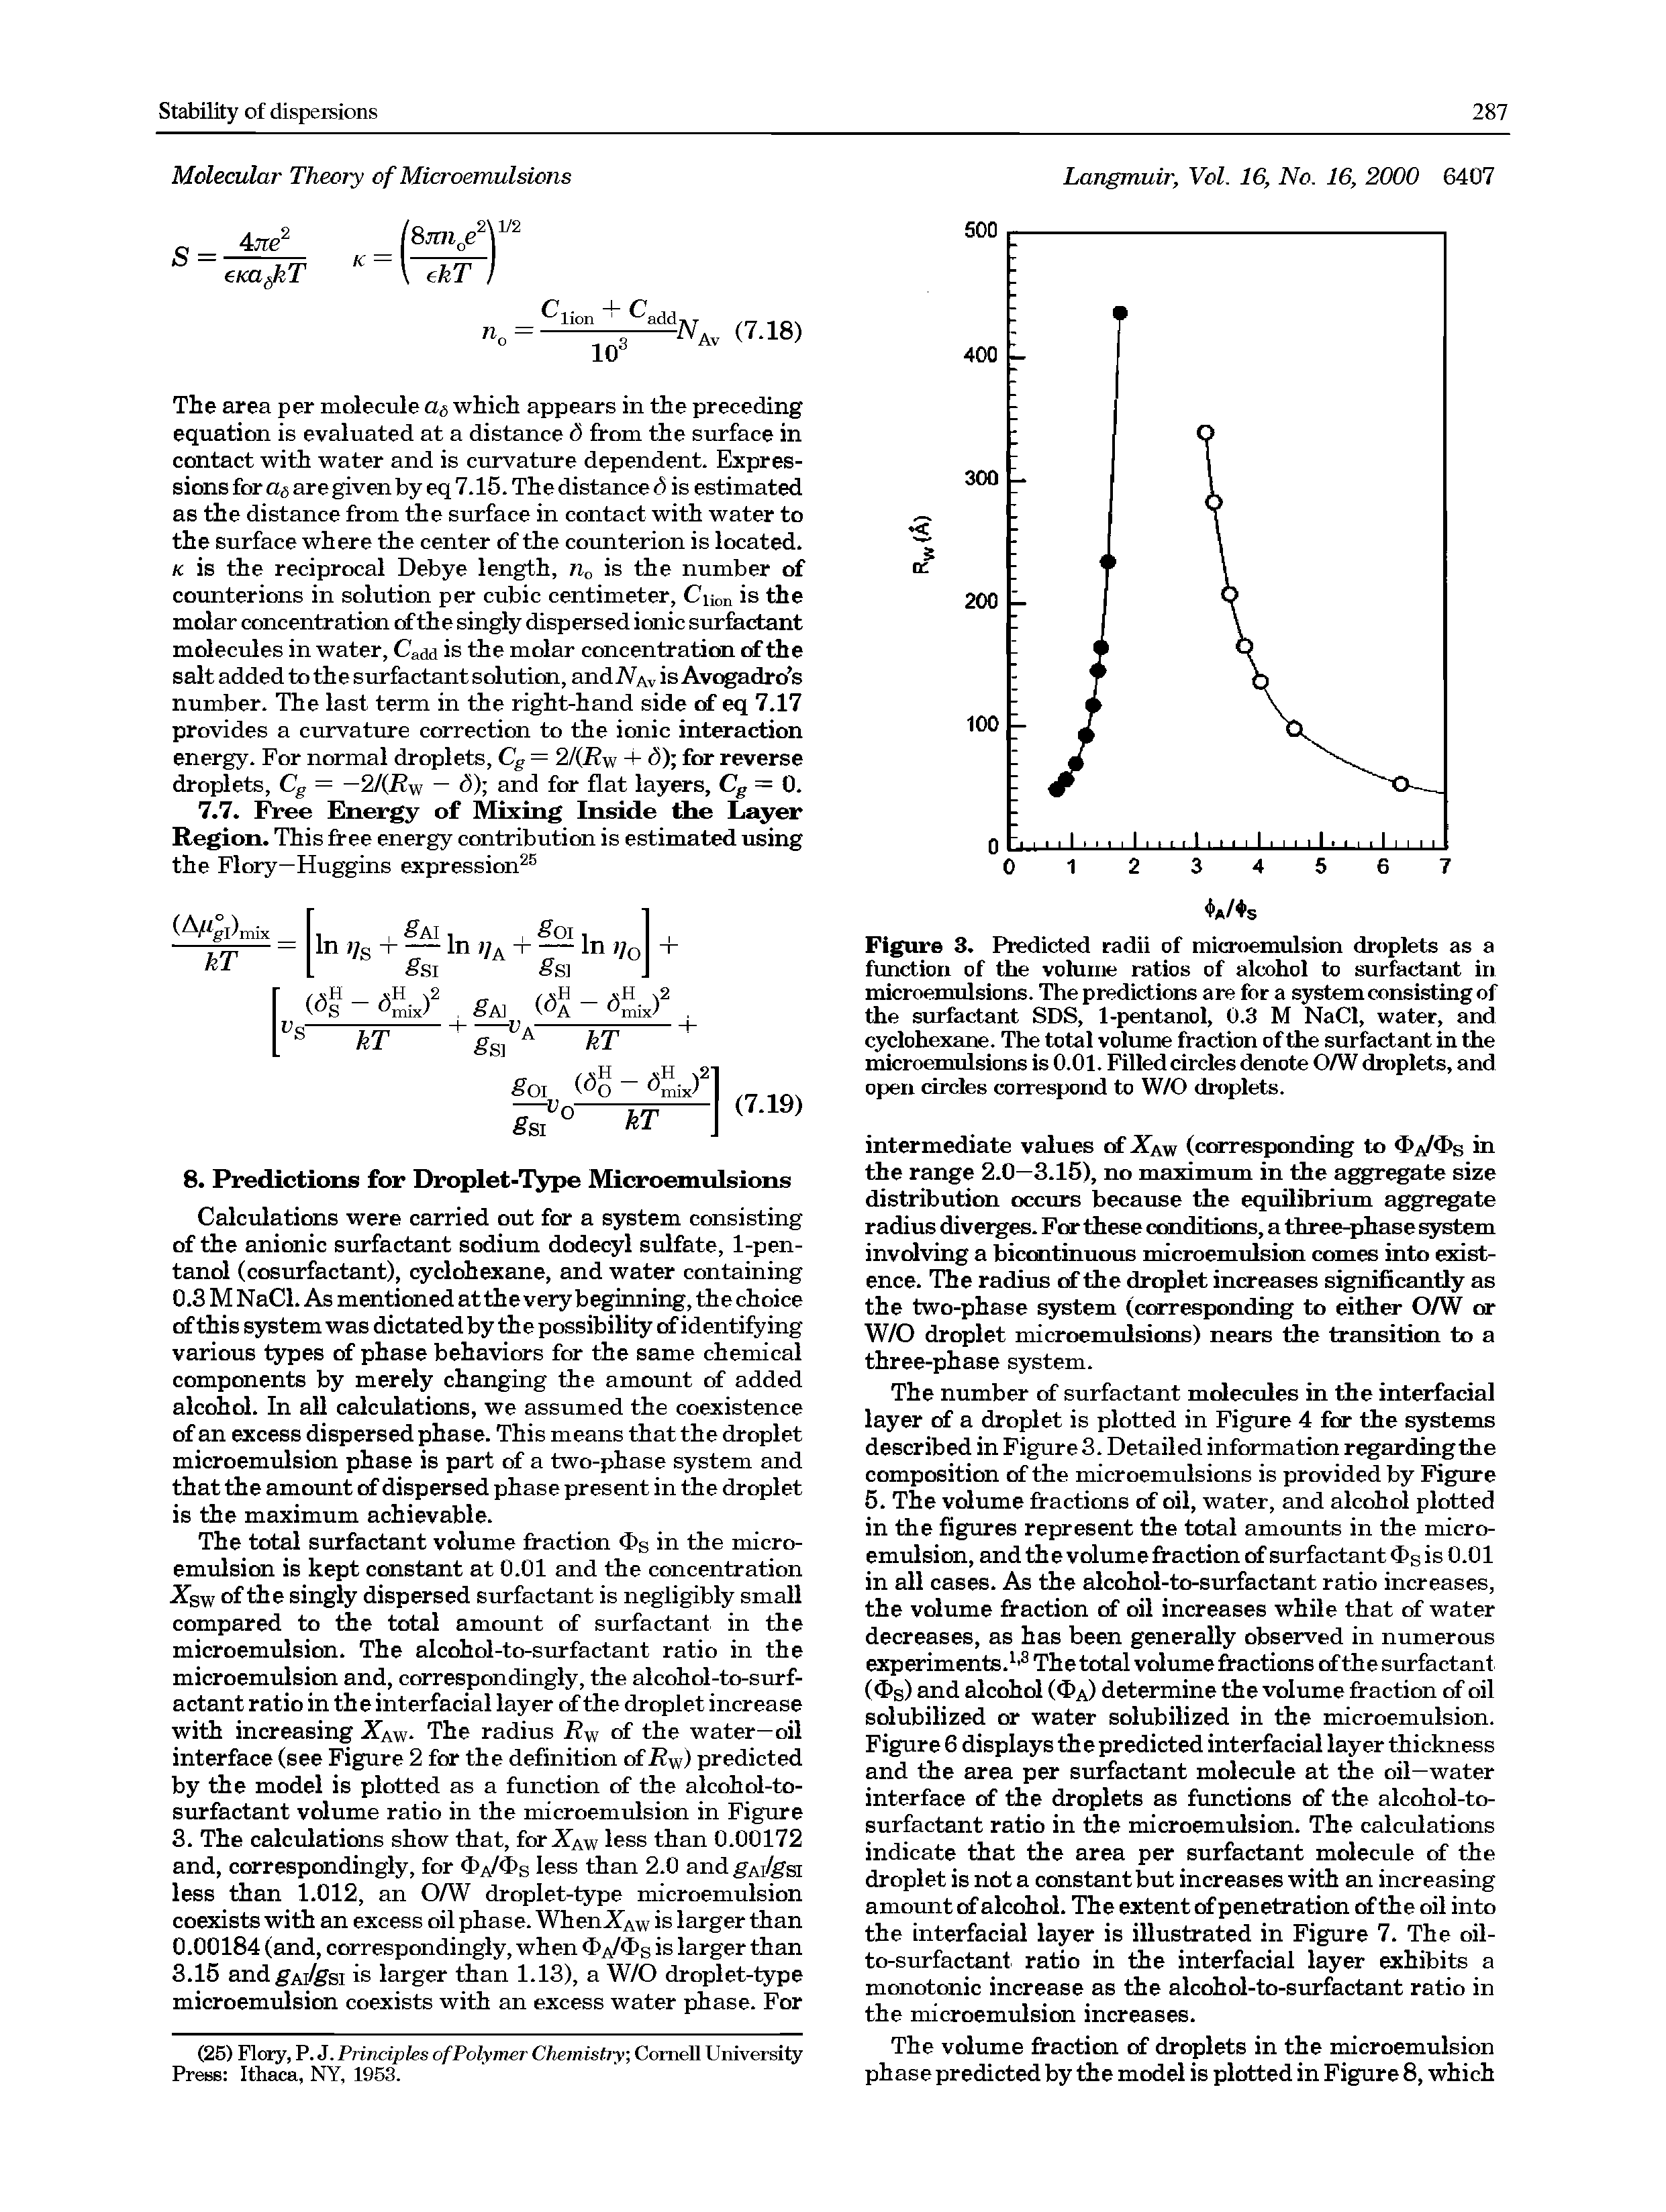 Figure 3. Predicted radii of microemulsion droplets as a function of the volume ratios of alcohol to surfactant in microemulsions. The predictions are for a system consisting of the surfactant SDS, 1-pentanol, 0.3 M NaCl, water, and cyclohexane. The total volume fraction of the surfactant in the microemulsions is 0.01. Filled circles denote O/W droplets, and open circles correspond to W/O droplets.